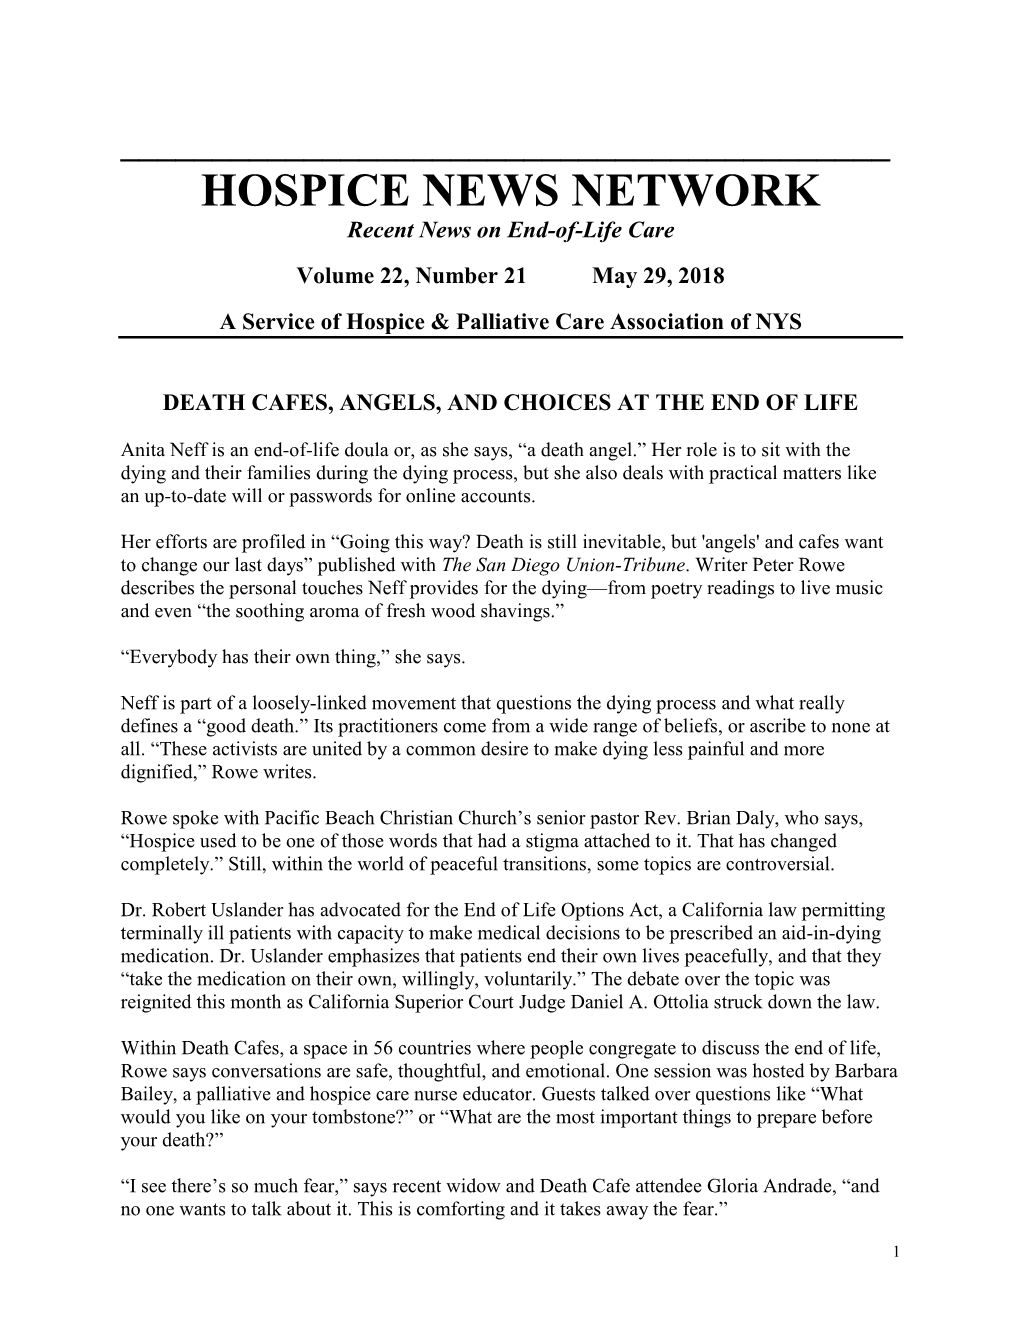 HOSPICE NEWS NETWORK Recent News on End-Of-Life Care